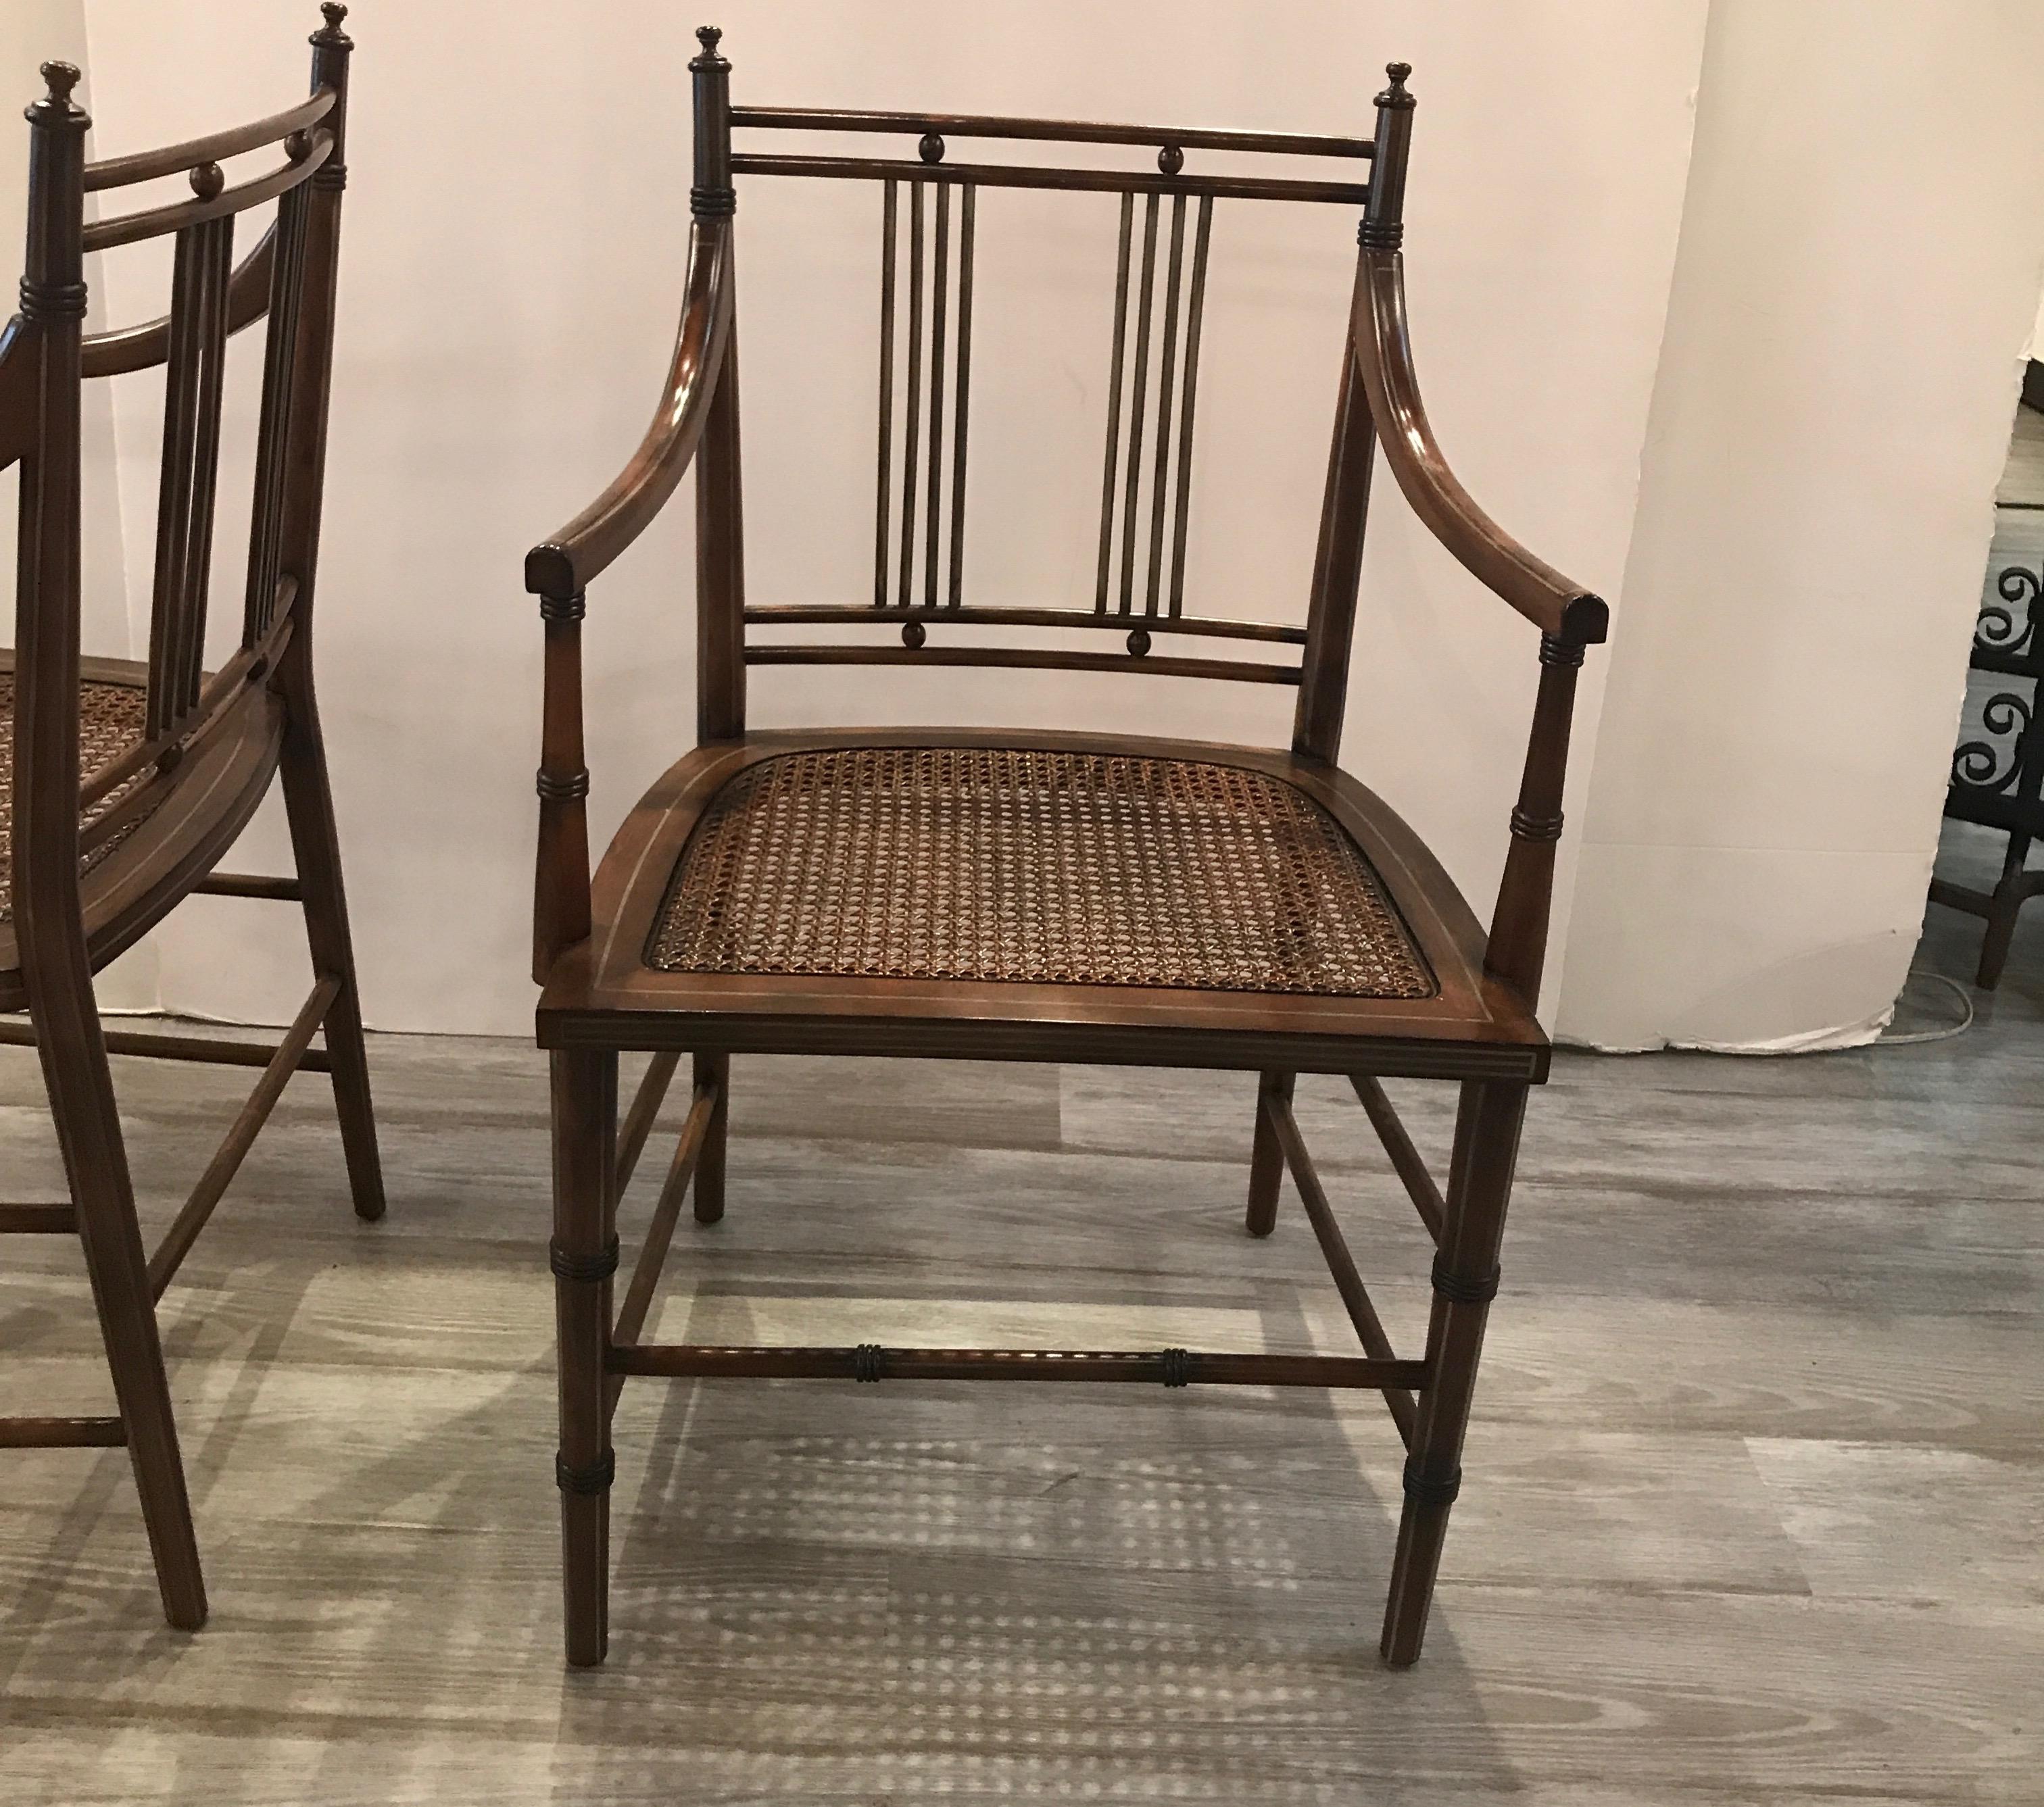 Chic pair of fruitwood armchairs with caned seats. The chairs are thin pewter pinstripe on some of the rungs and along the sides. These chairs have a Bauhaus inspired design. These are price for the pair, with a total of 4 chairs. (2 pairs).